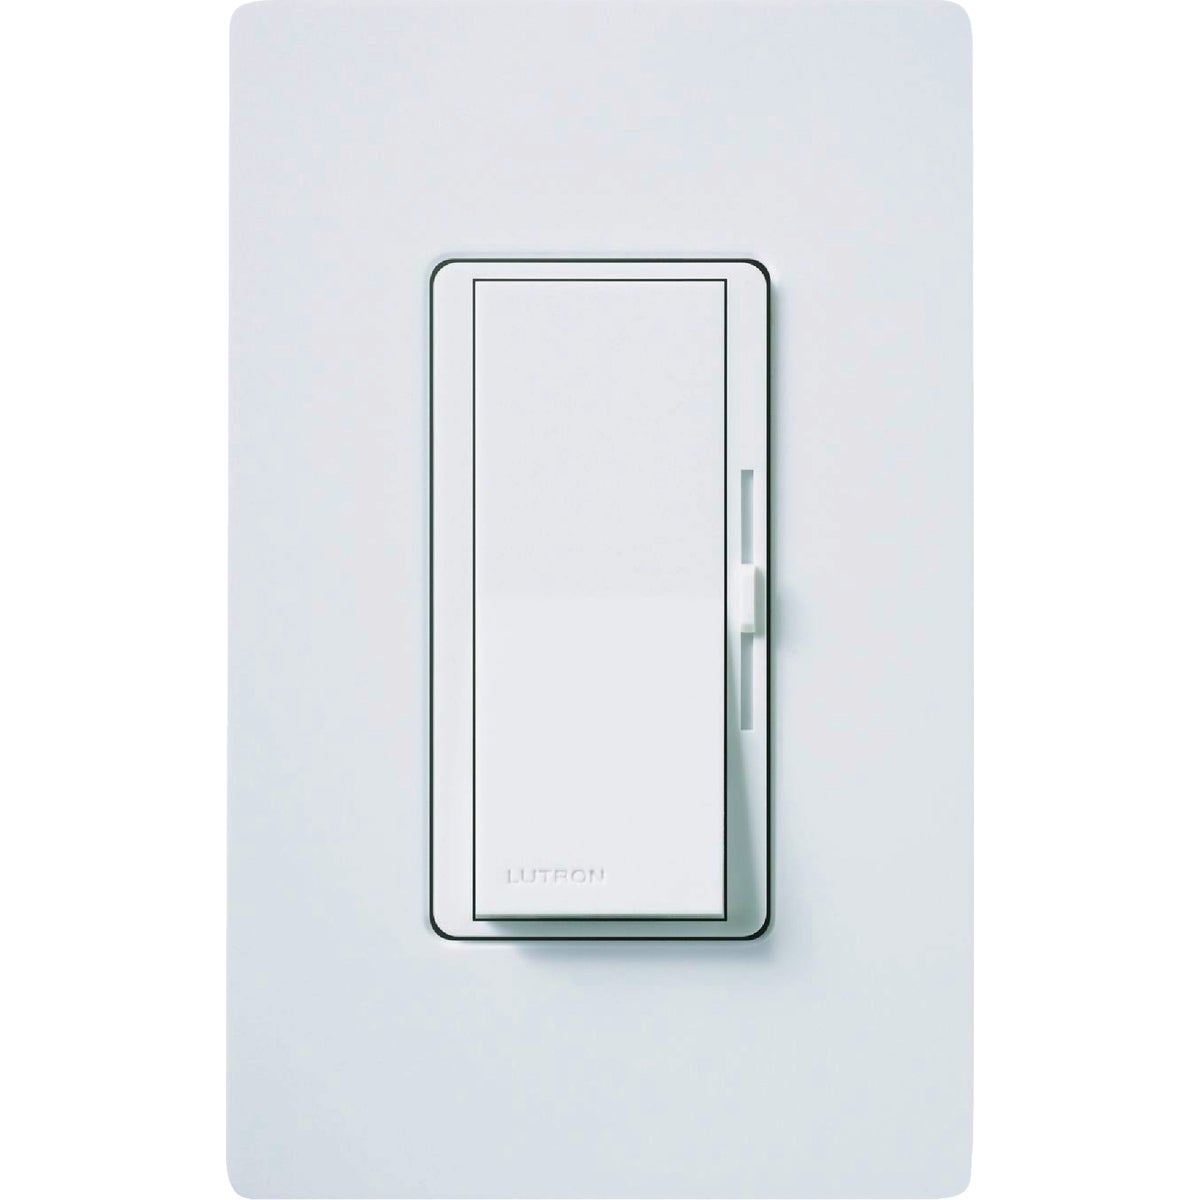 Item 525122, Dimmer which provides optimal dimming performance of LED (light emitting 